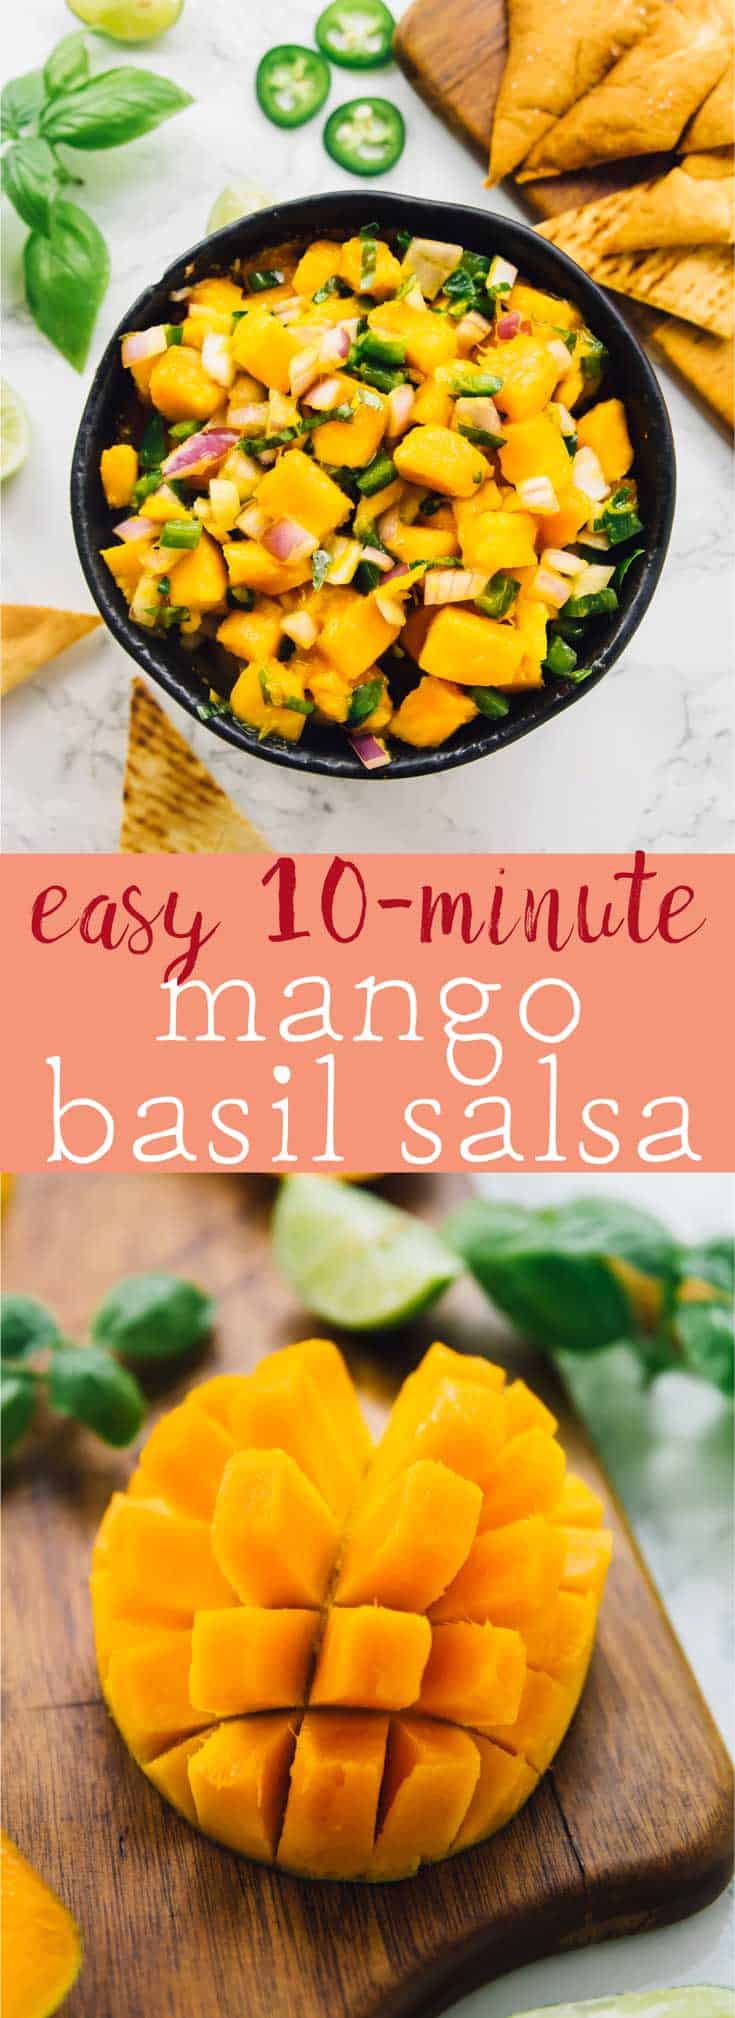 This Easy Mango Basil Salsa takes only 10 minutes with 5 ingredients! It’s a sweet and spicy salsa that is a total crowd pleaser and great for parties! via https://jessicainthekitchen.com